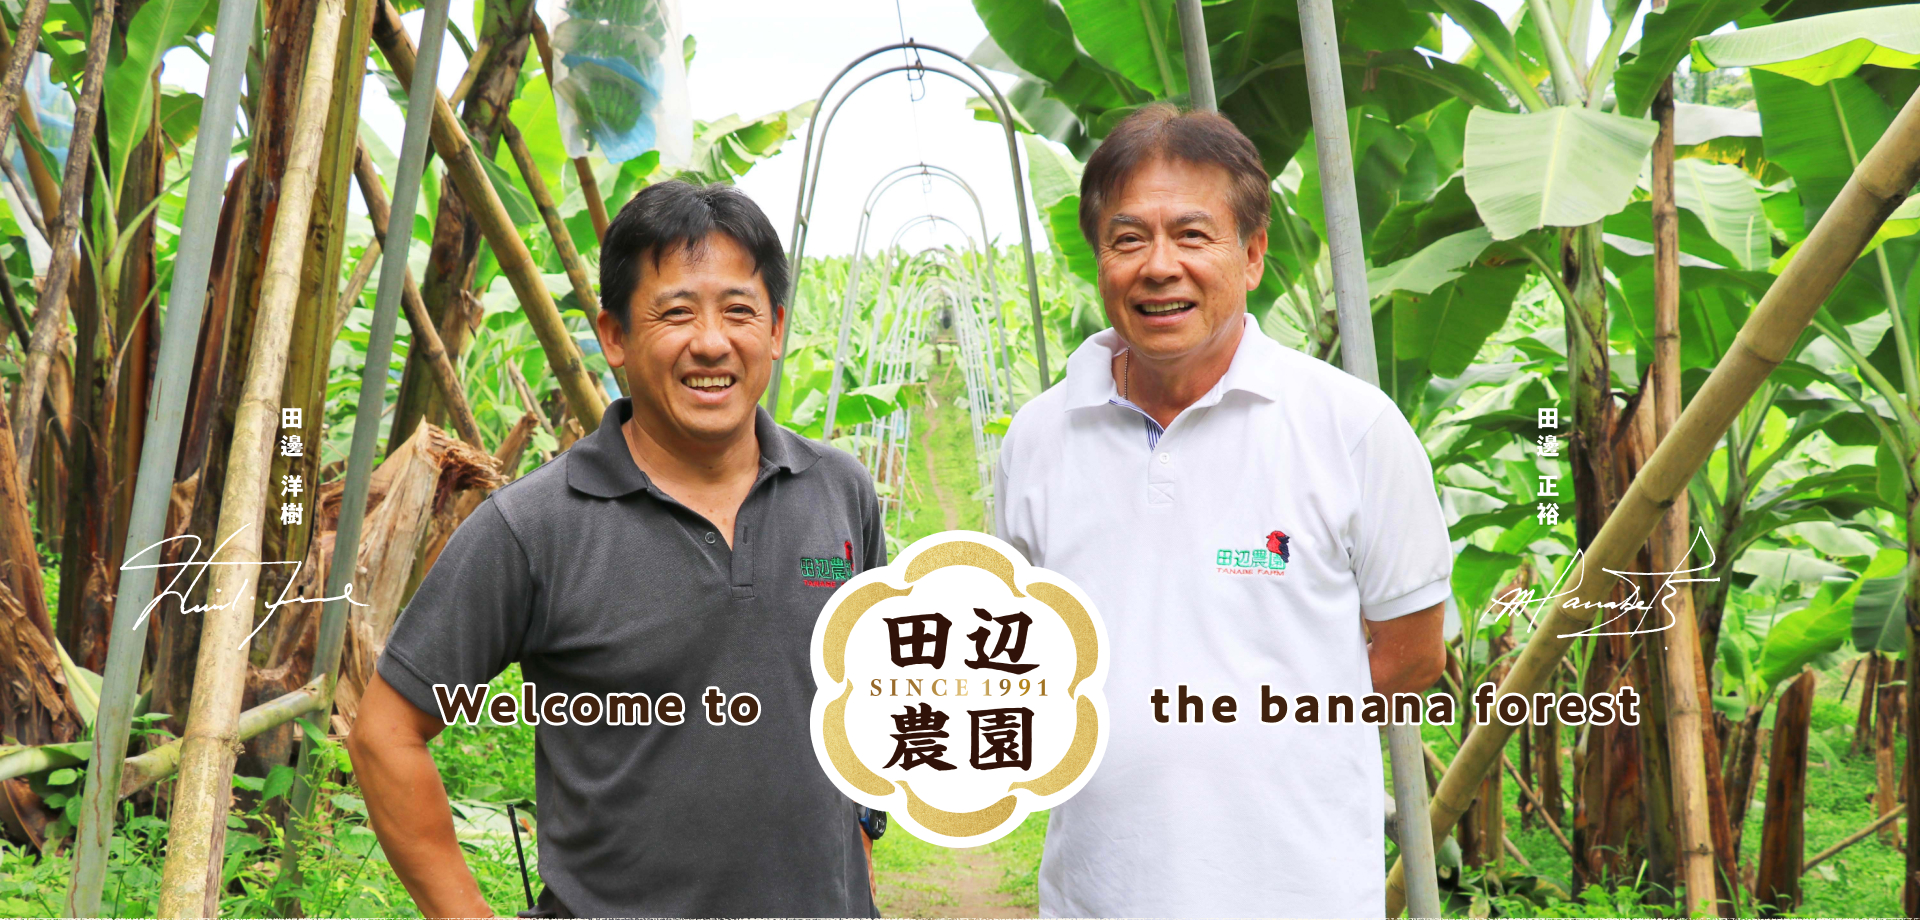 Tanabe Farm, Welcome to the banana forest